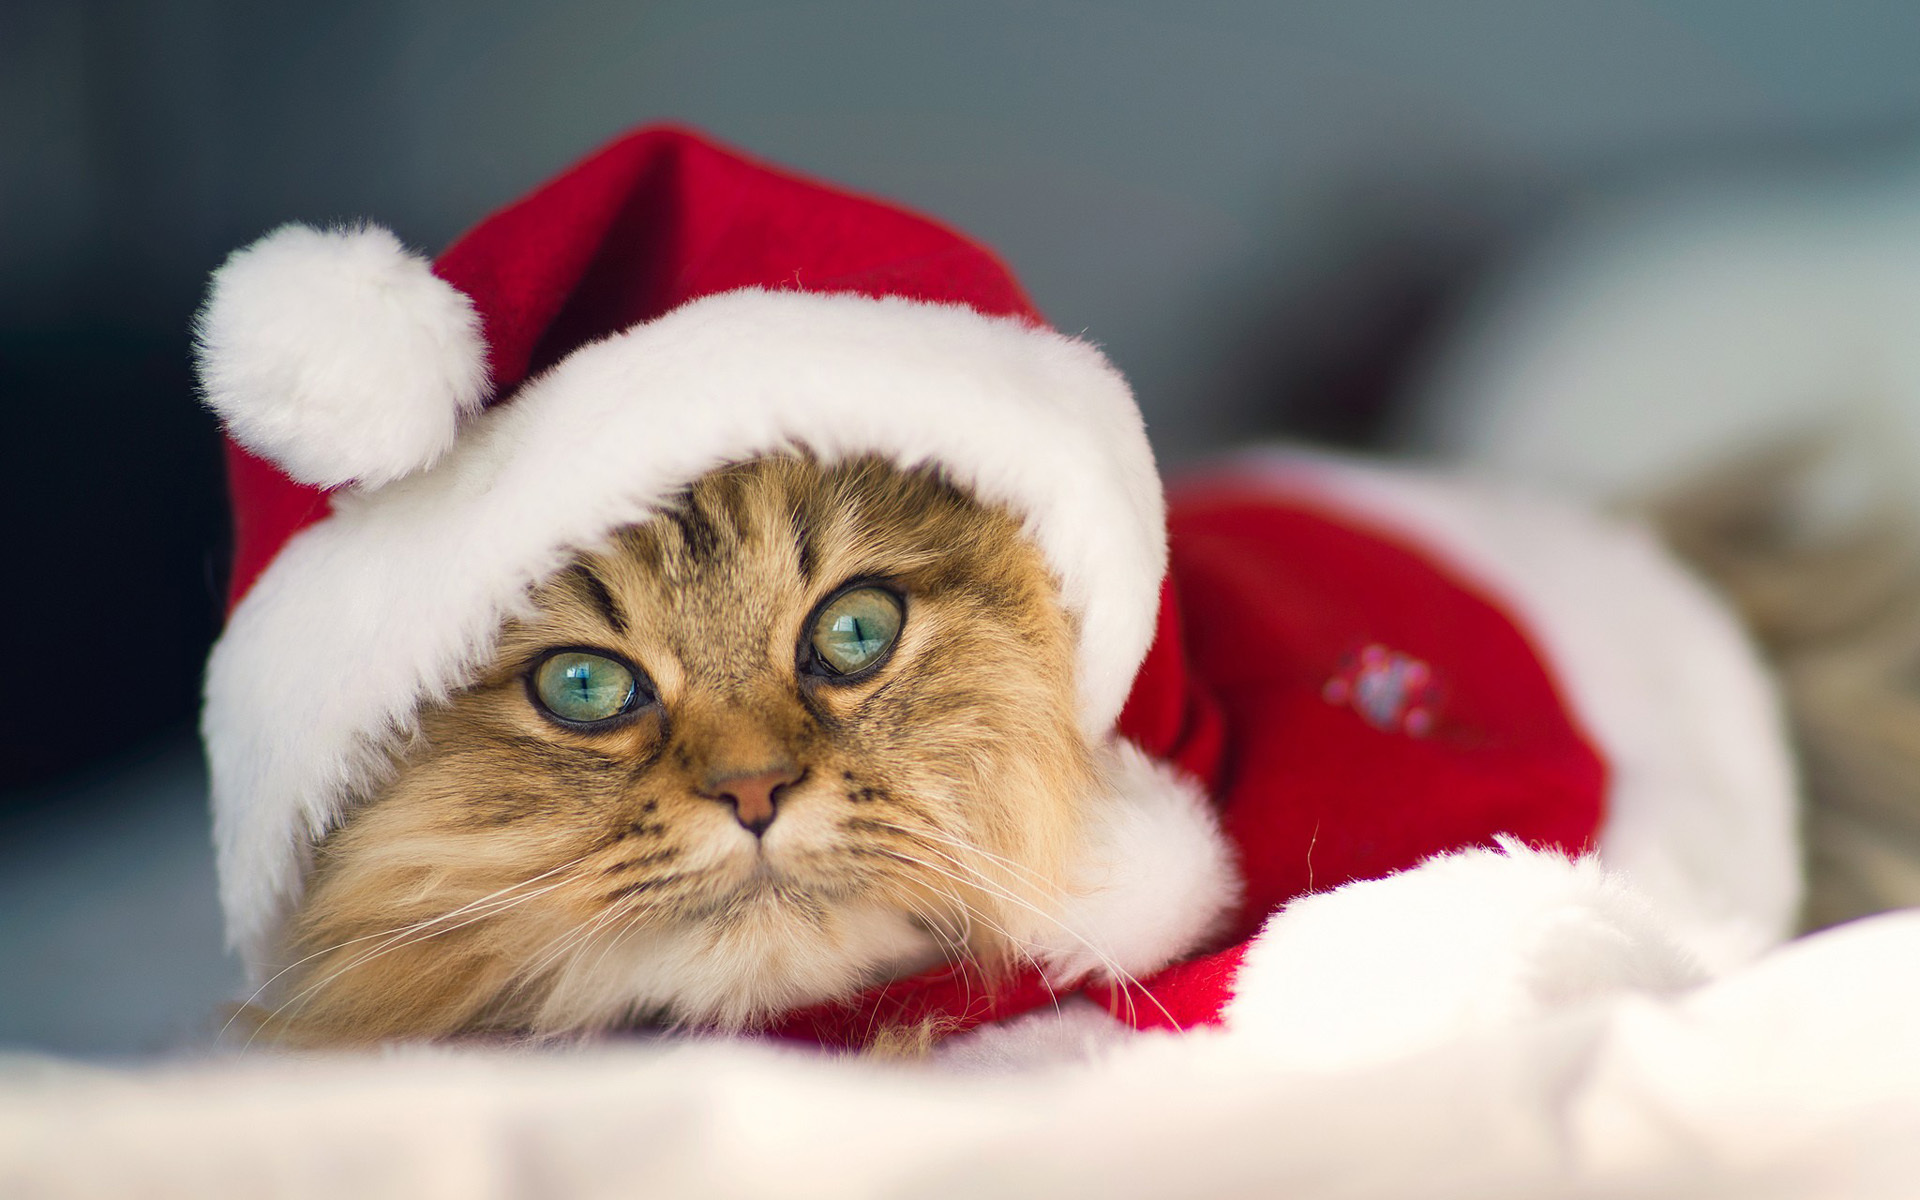 Beautiful Christmas Cat wallpapers and images - wallpapers, pictures